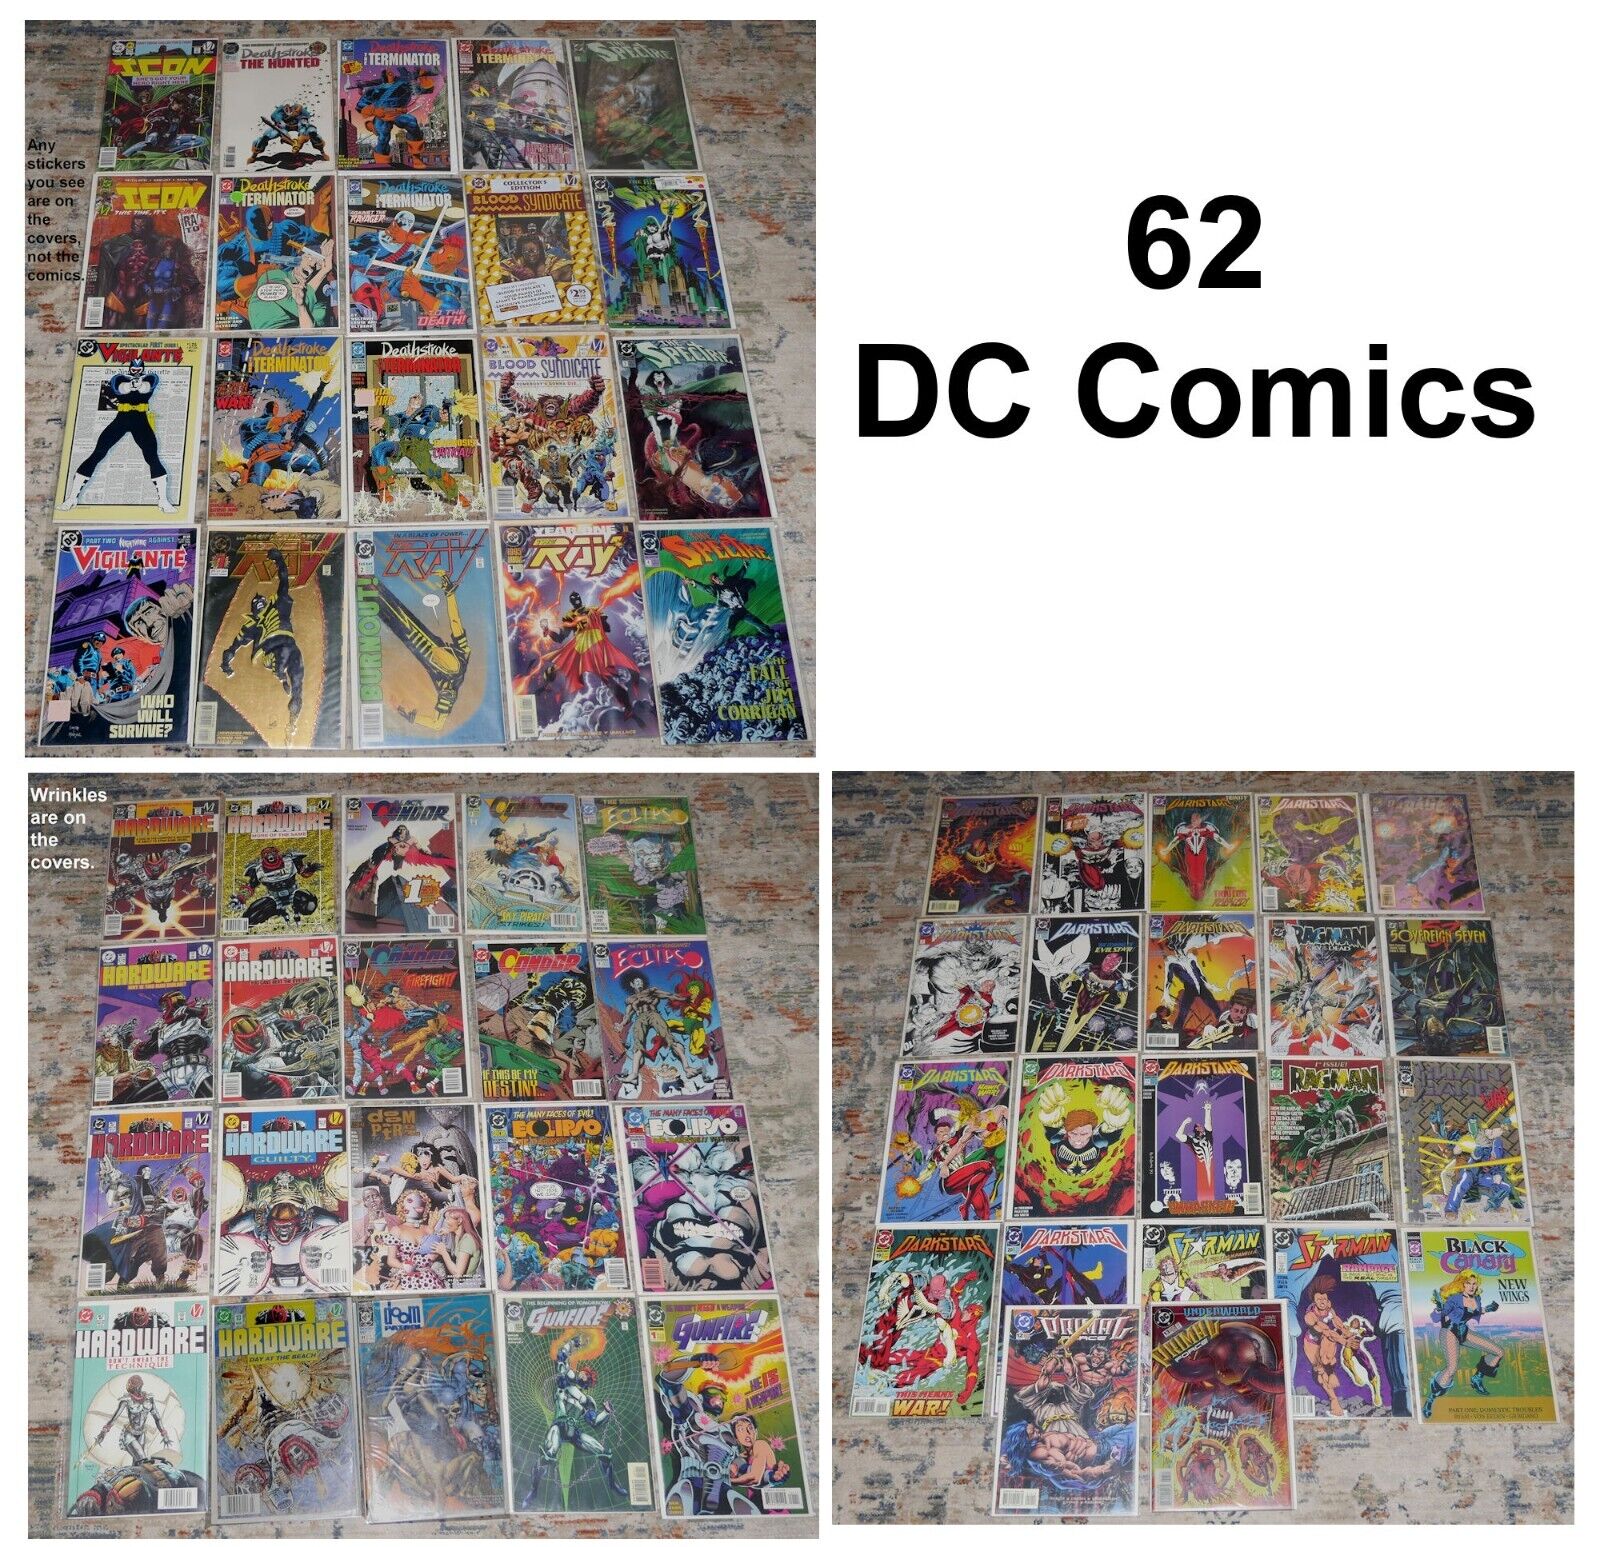 62 DC Comics. ICON, HARDWARE, DEATHSTROKE, BLOOD SYNDICATE, THE RAY, More